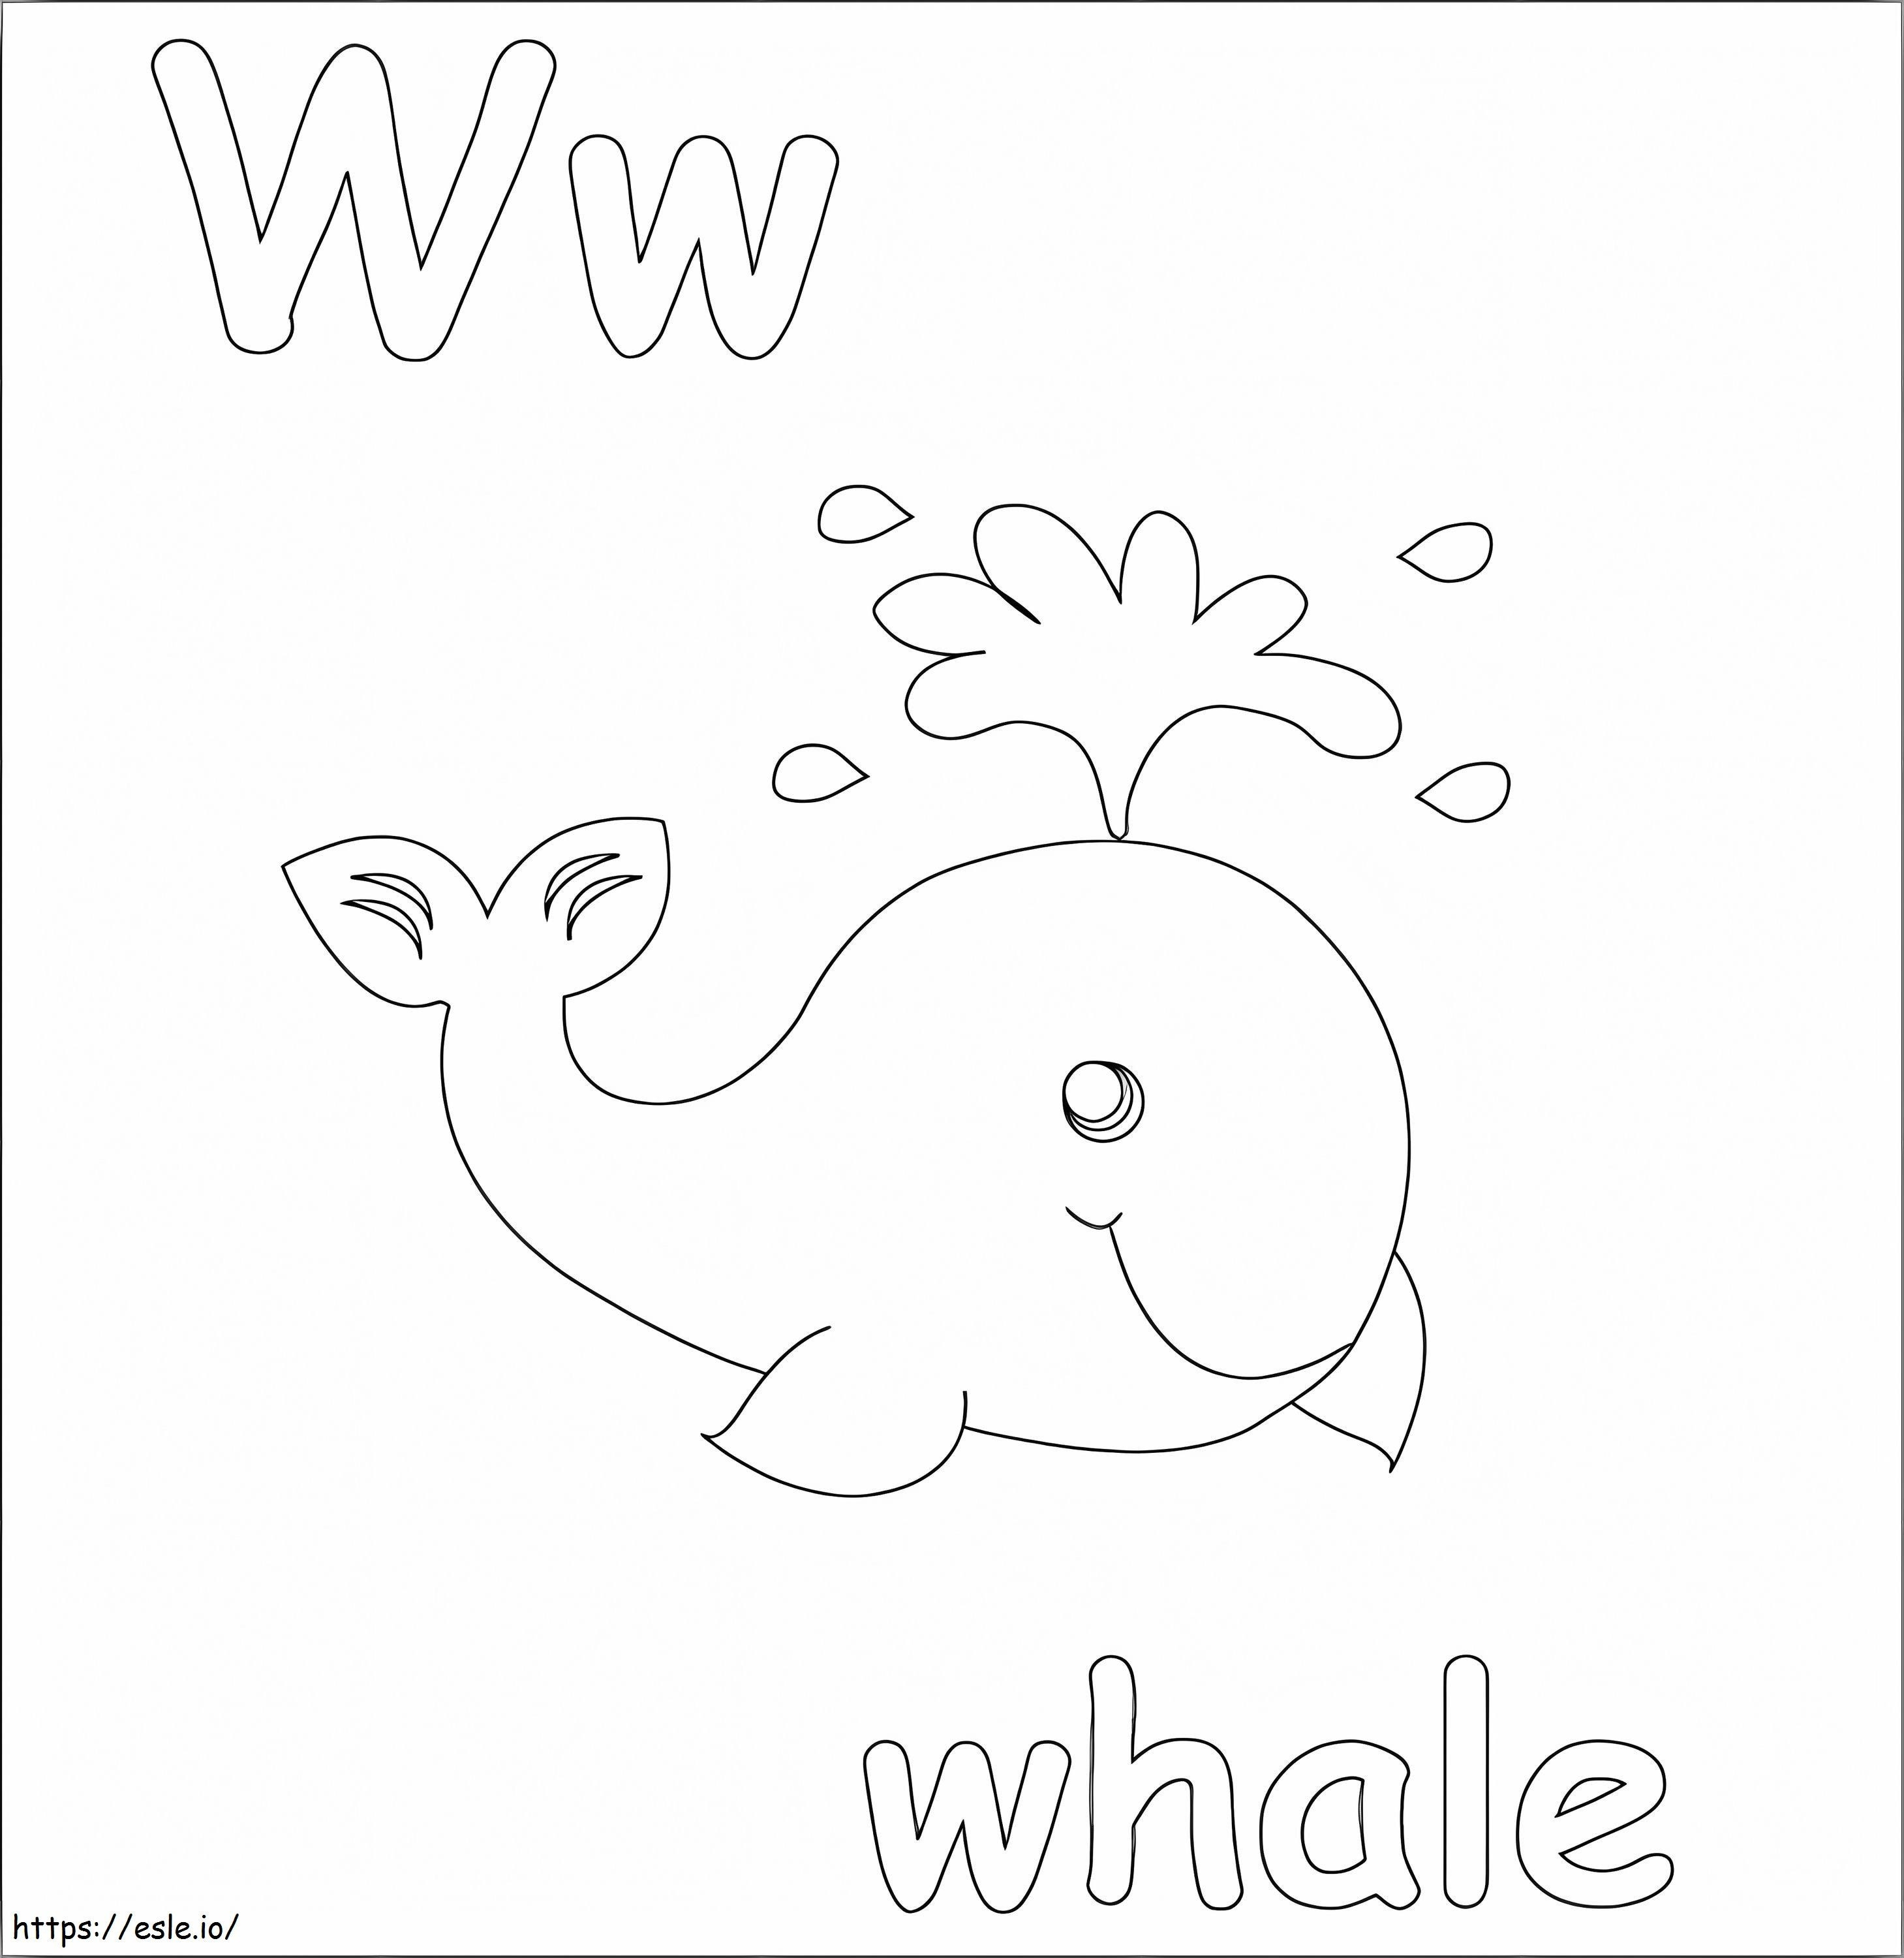 The Letter W Is For Whale coloring page